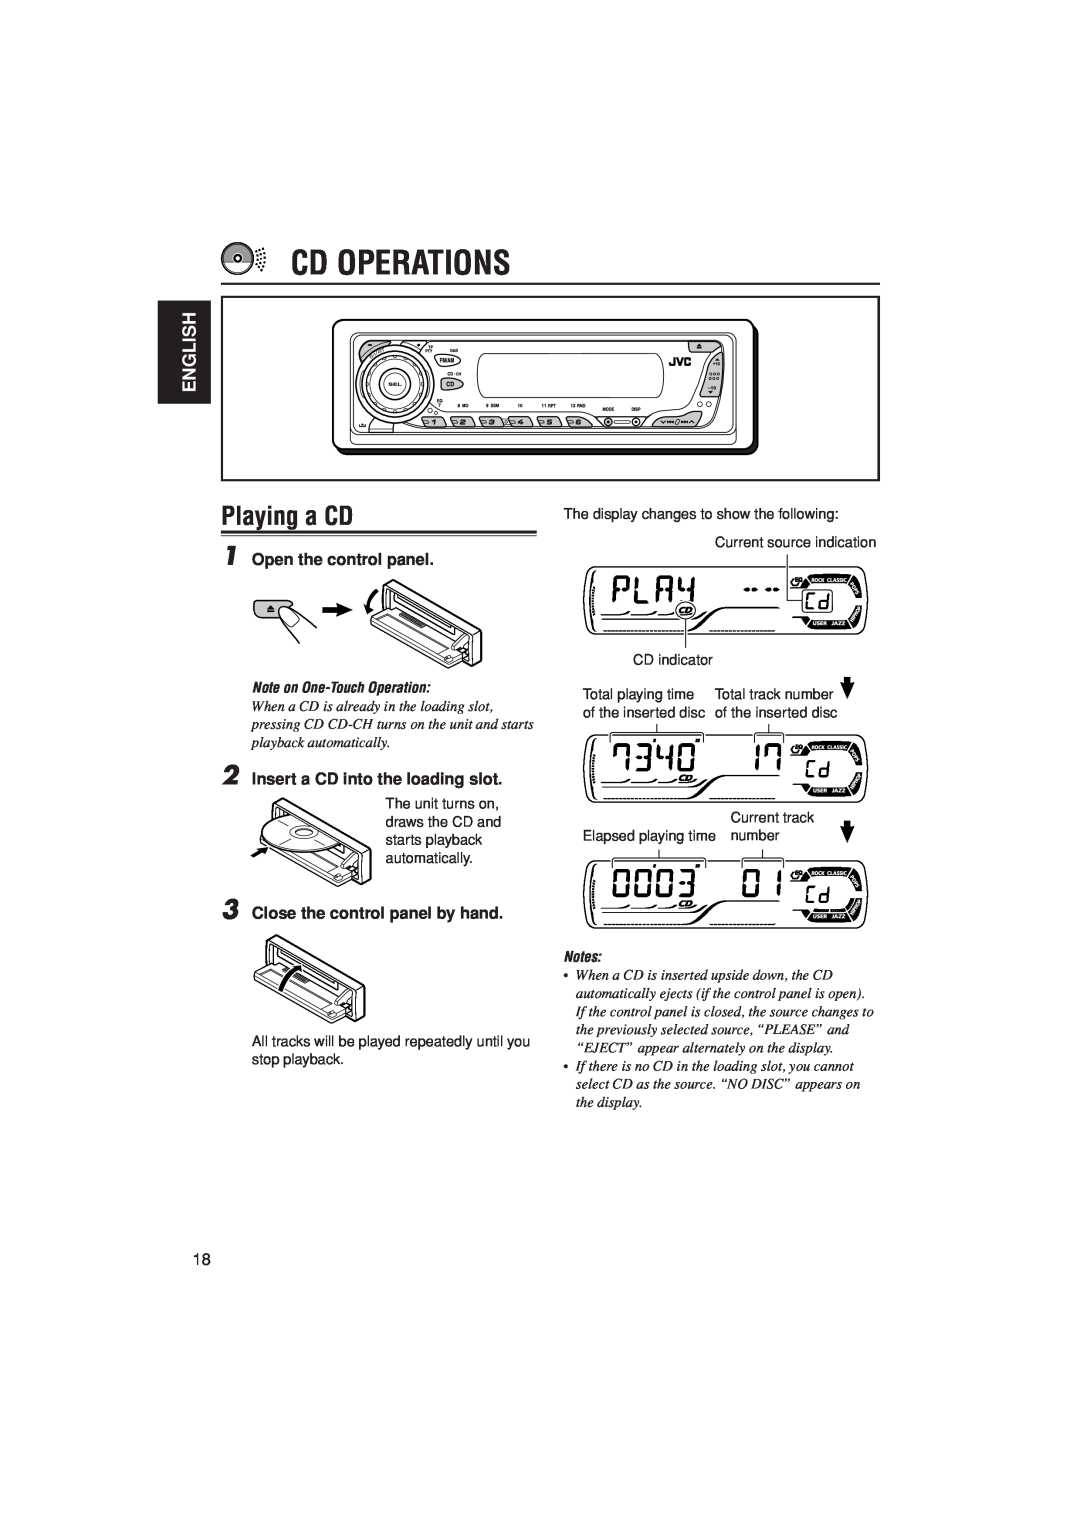 JVC KD-G301, KD-G302 manual Cd Operations, Playing a CD, English, Note on One-TouchOperation 